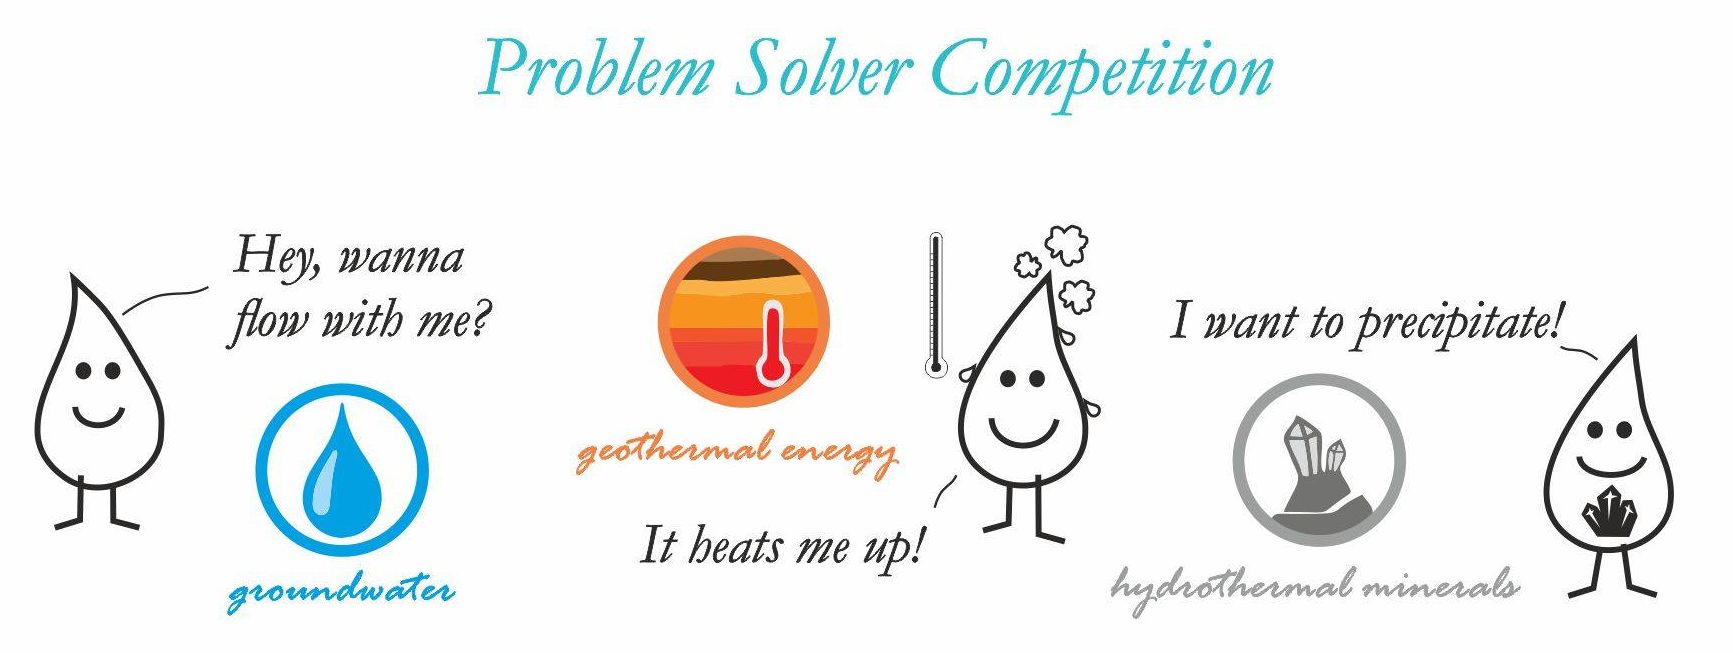 Final round and winners of the Problem Solver Competition